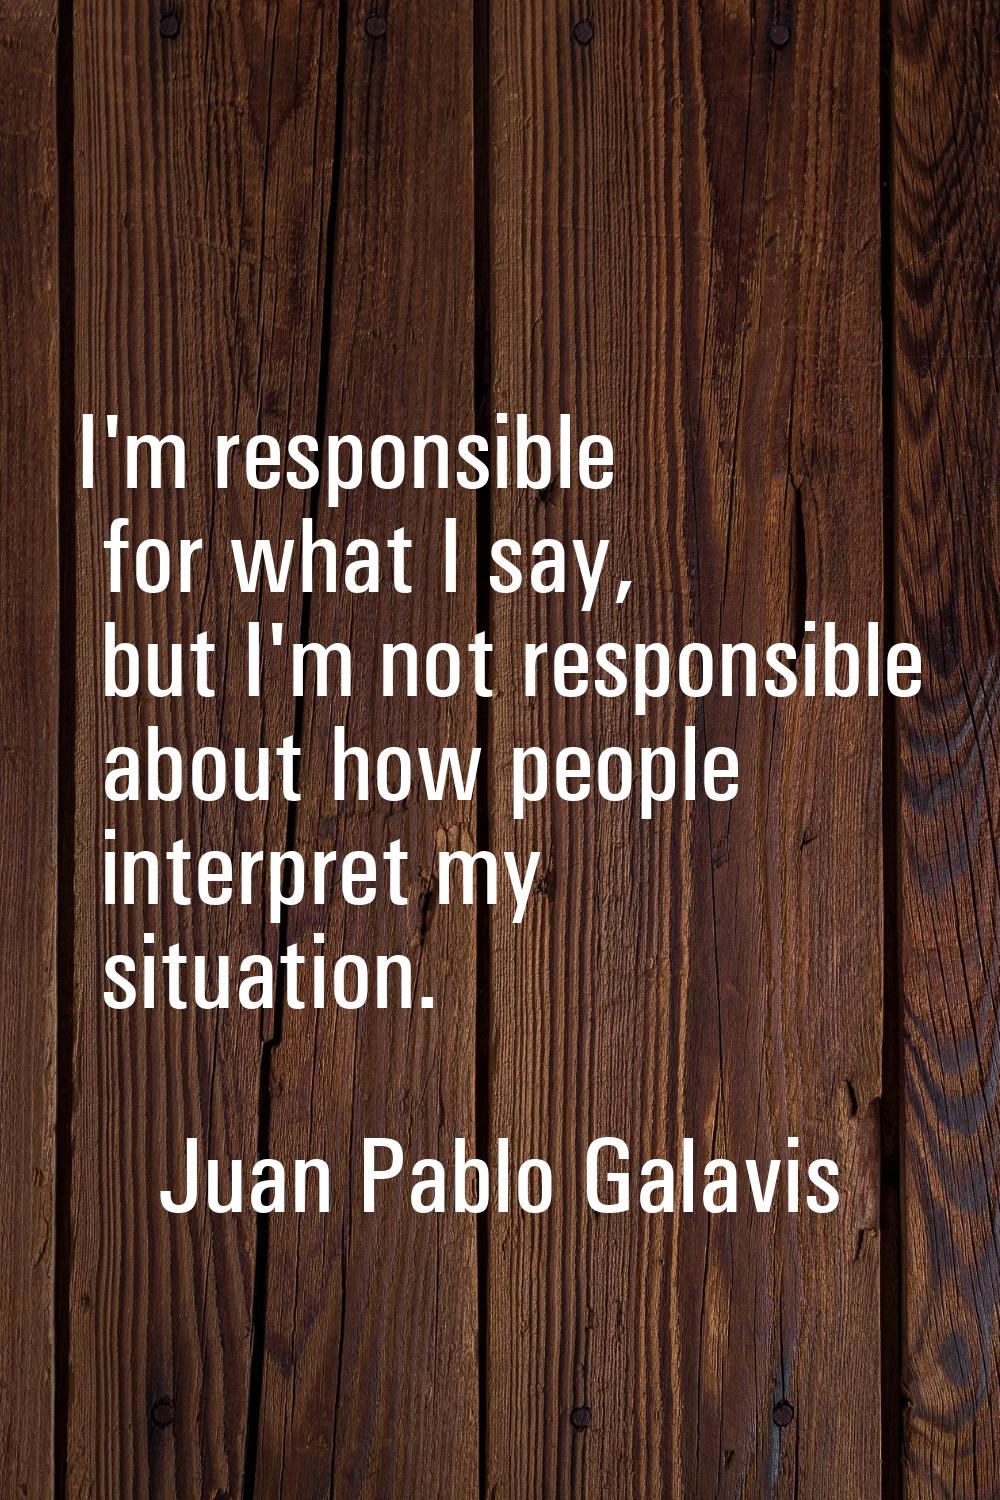 I'm responsible for what I say, but I'm not responsible about how people interpret my situation.